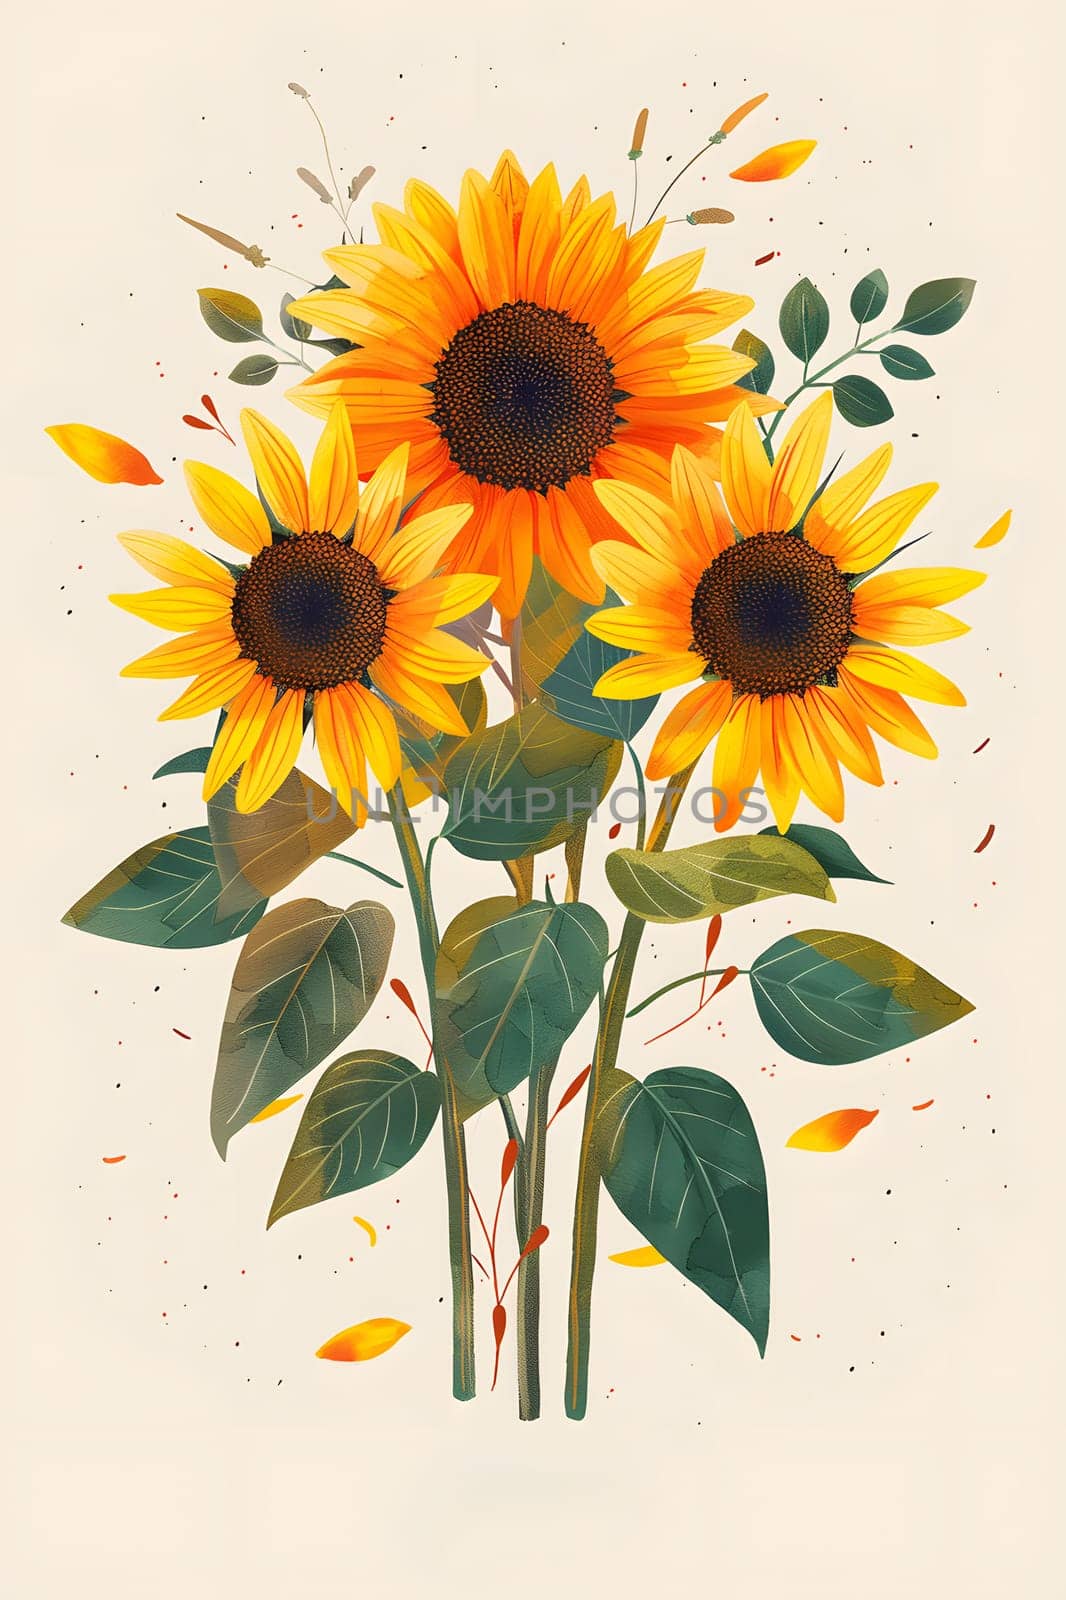 A beautiful painting depicting a bunch of sunflowers with green leaves on a white background. The vibrant petals of the sunflowers bring the artwork to life